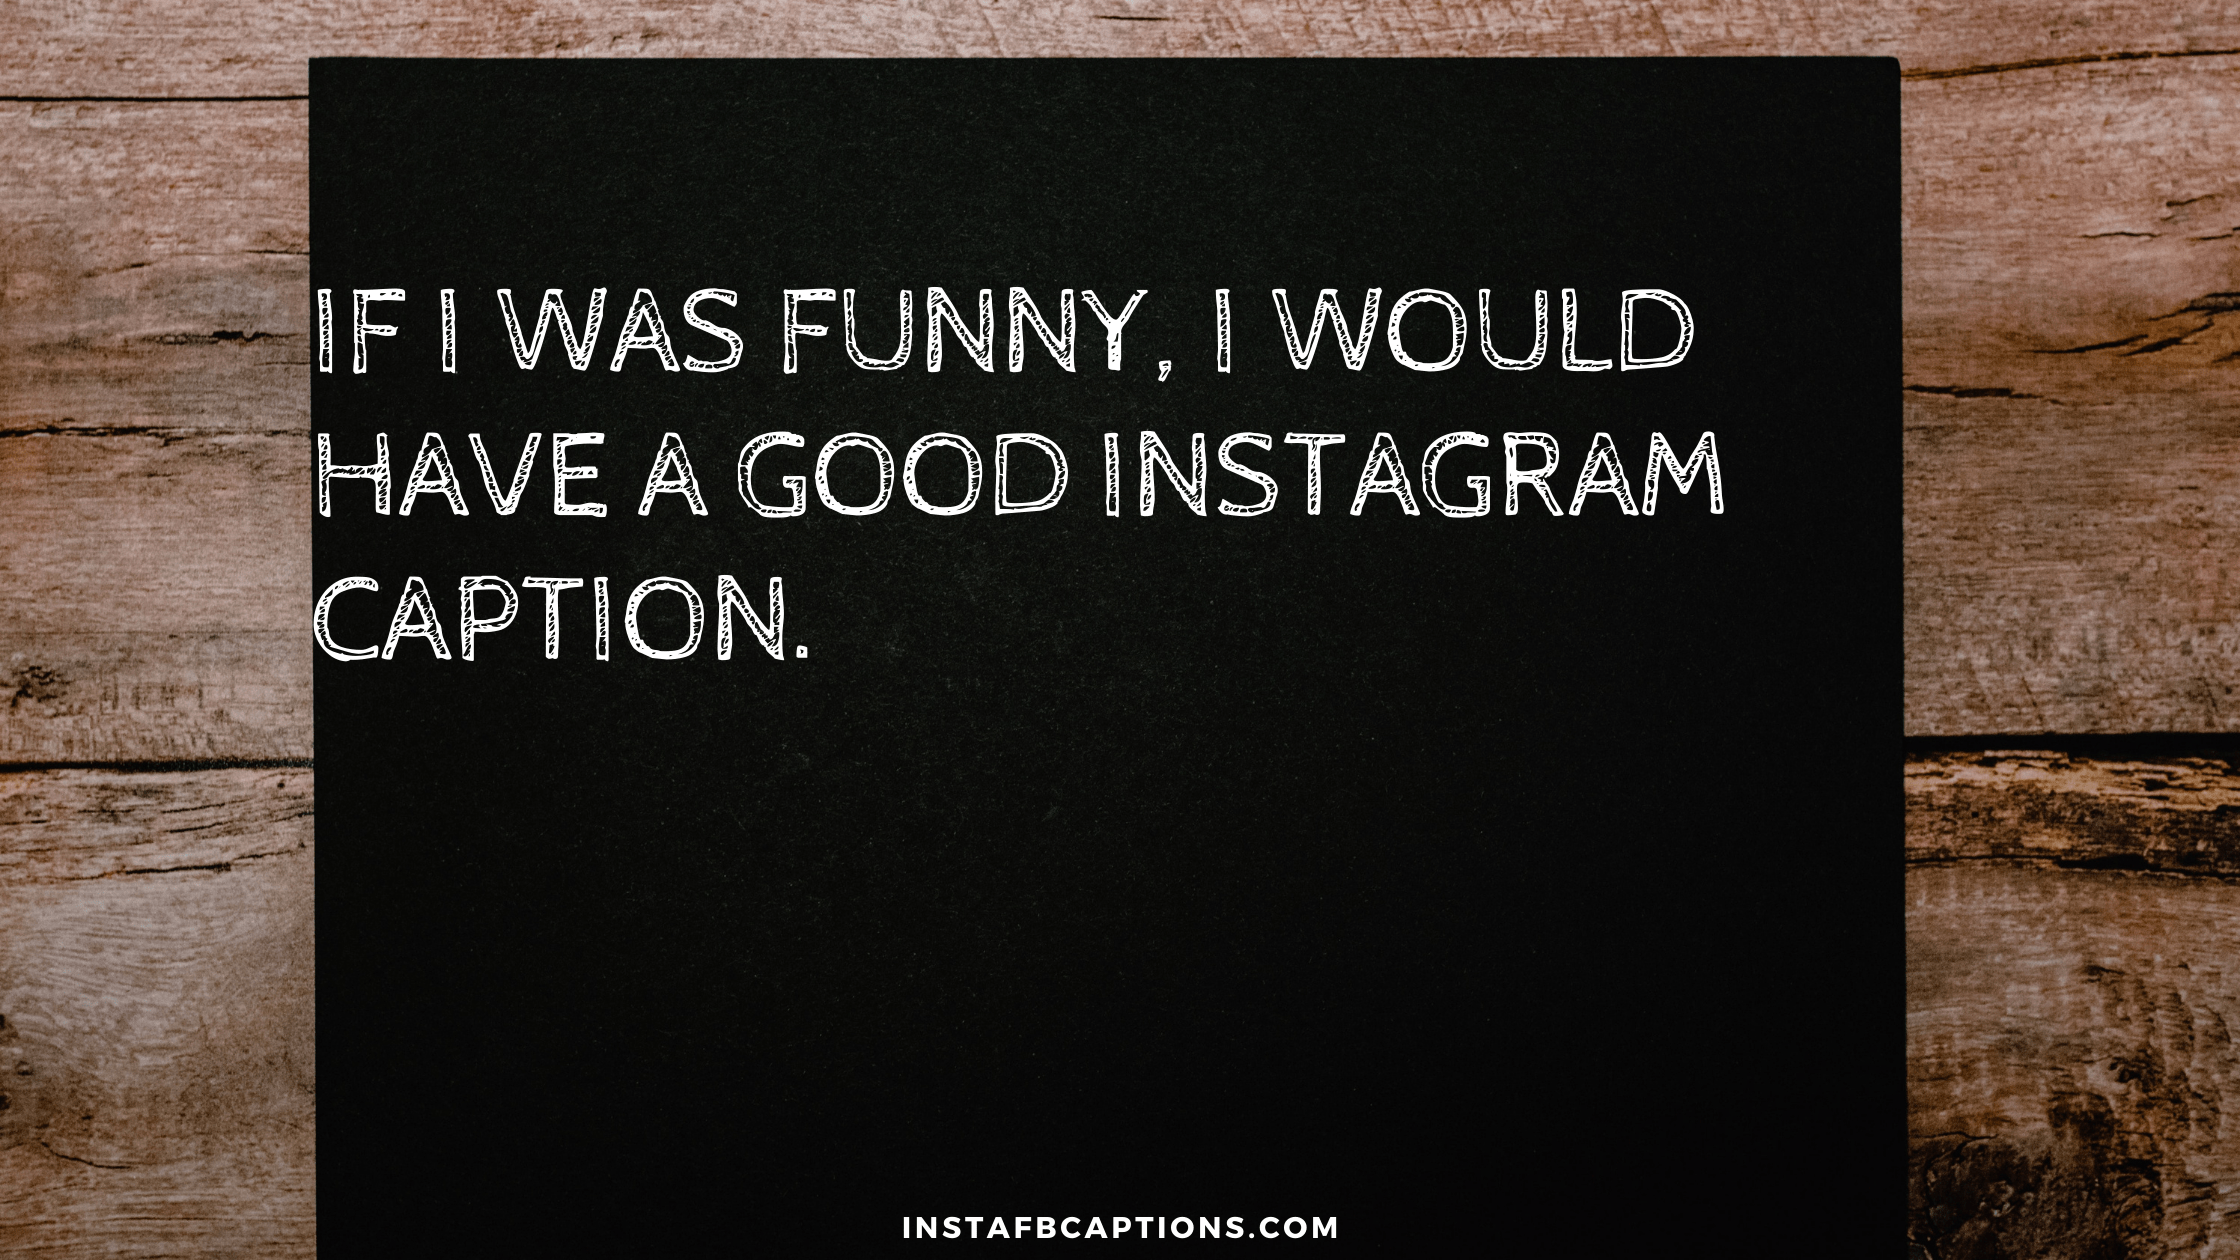 Most Funny Captions To Make Your Post Amazi  - Most Funny Captions To Make Your Post Amazing 1 - Different Captions for Multiple Photos on Instagram 2022